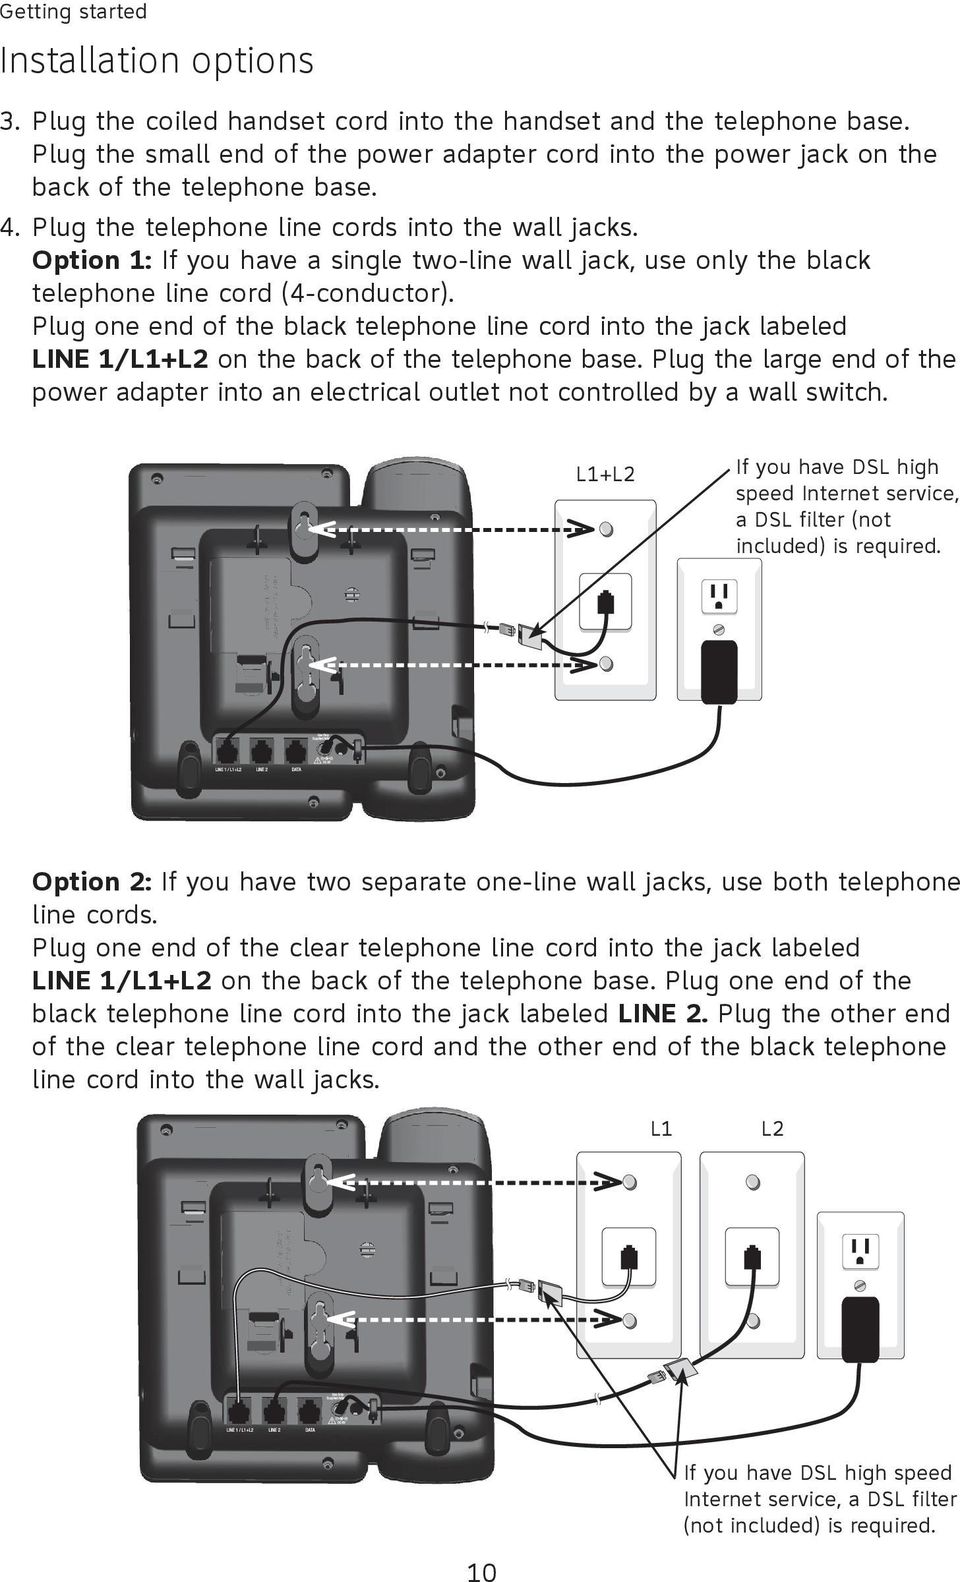 Option 1: If you have a single two-line wall jack, use only the black telephone line cord (4-conductor).